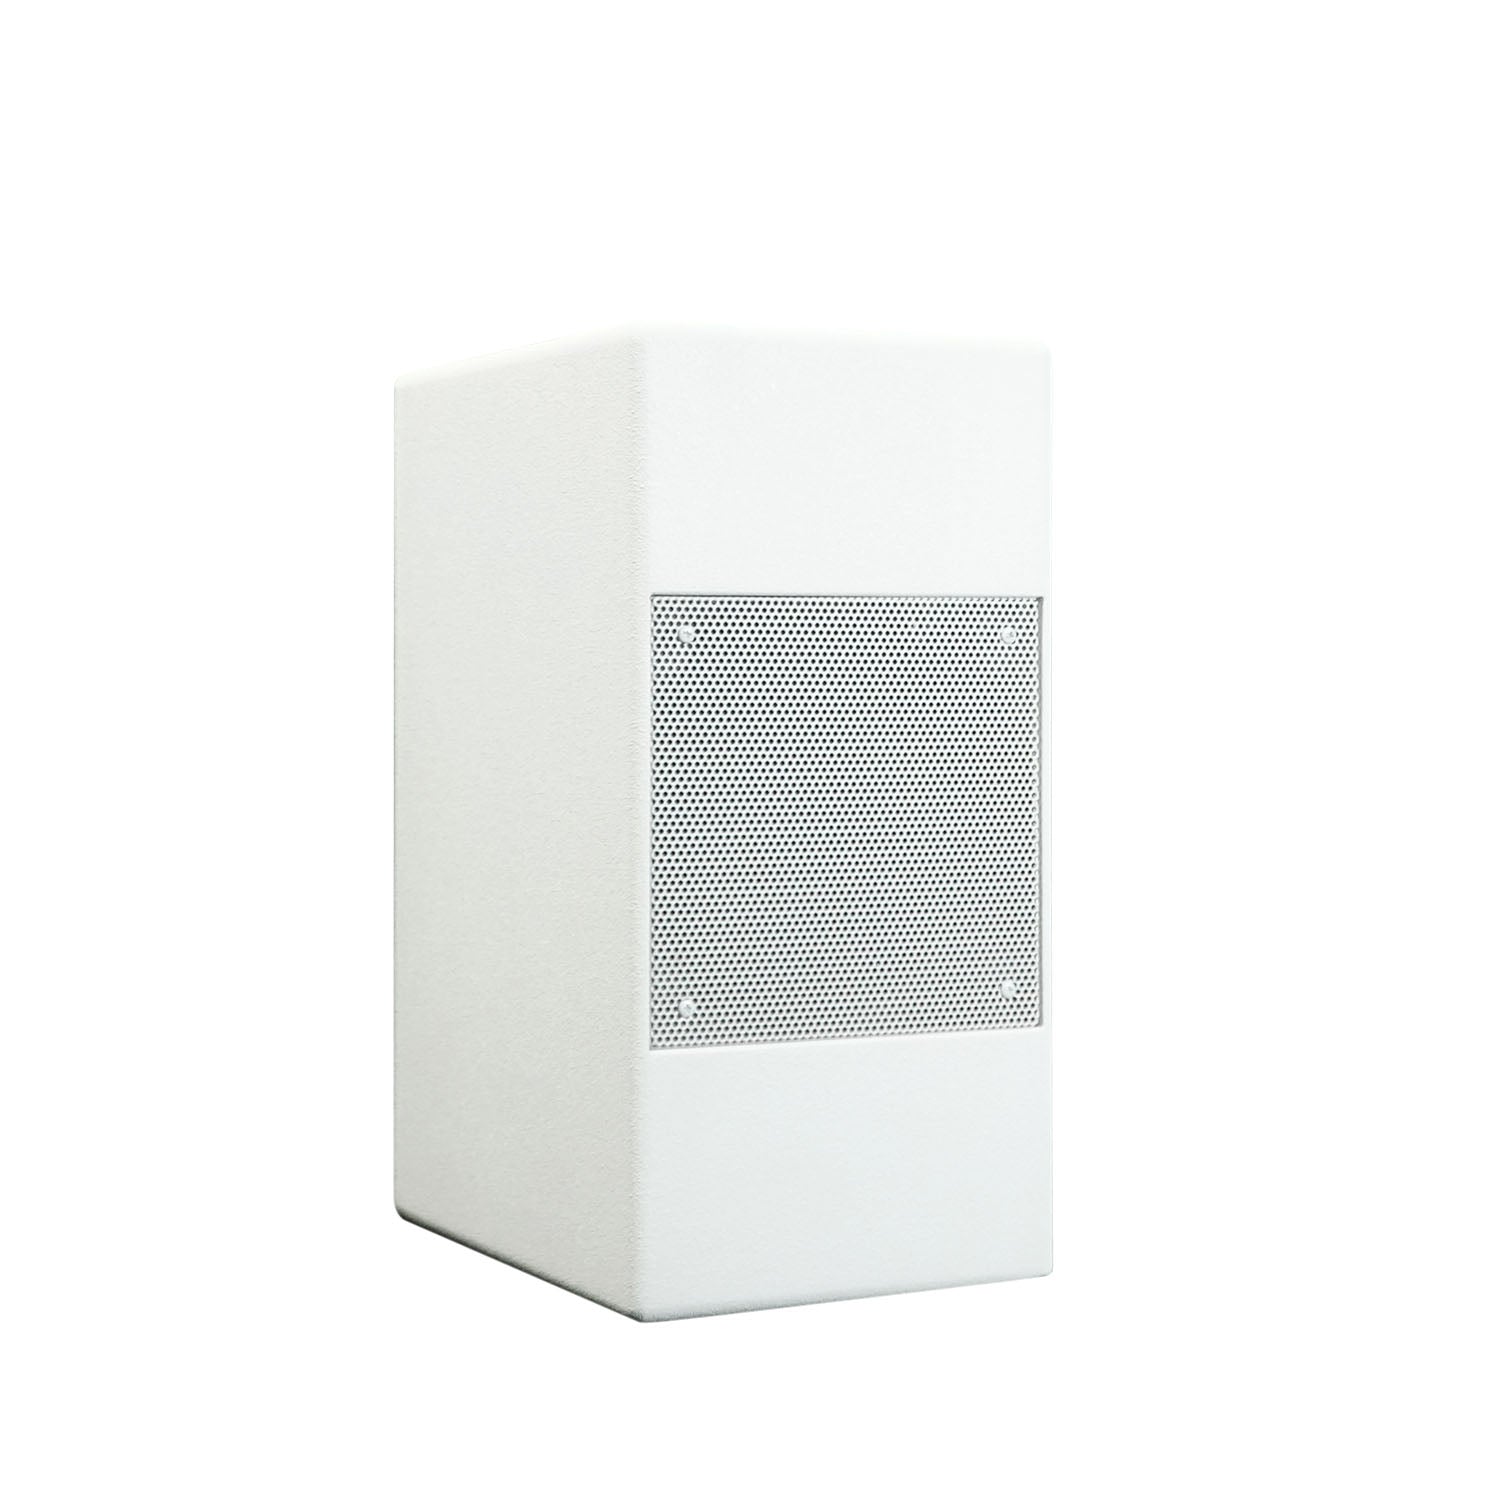 dB Technologies IS 8SW WHITE, 8" Passive Subwoofer 200W - White - Hollywood DJ